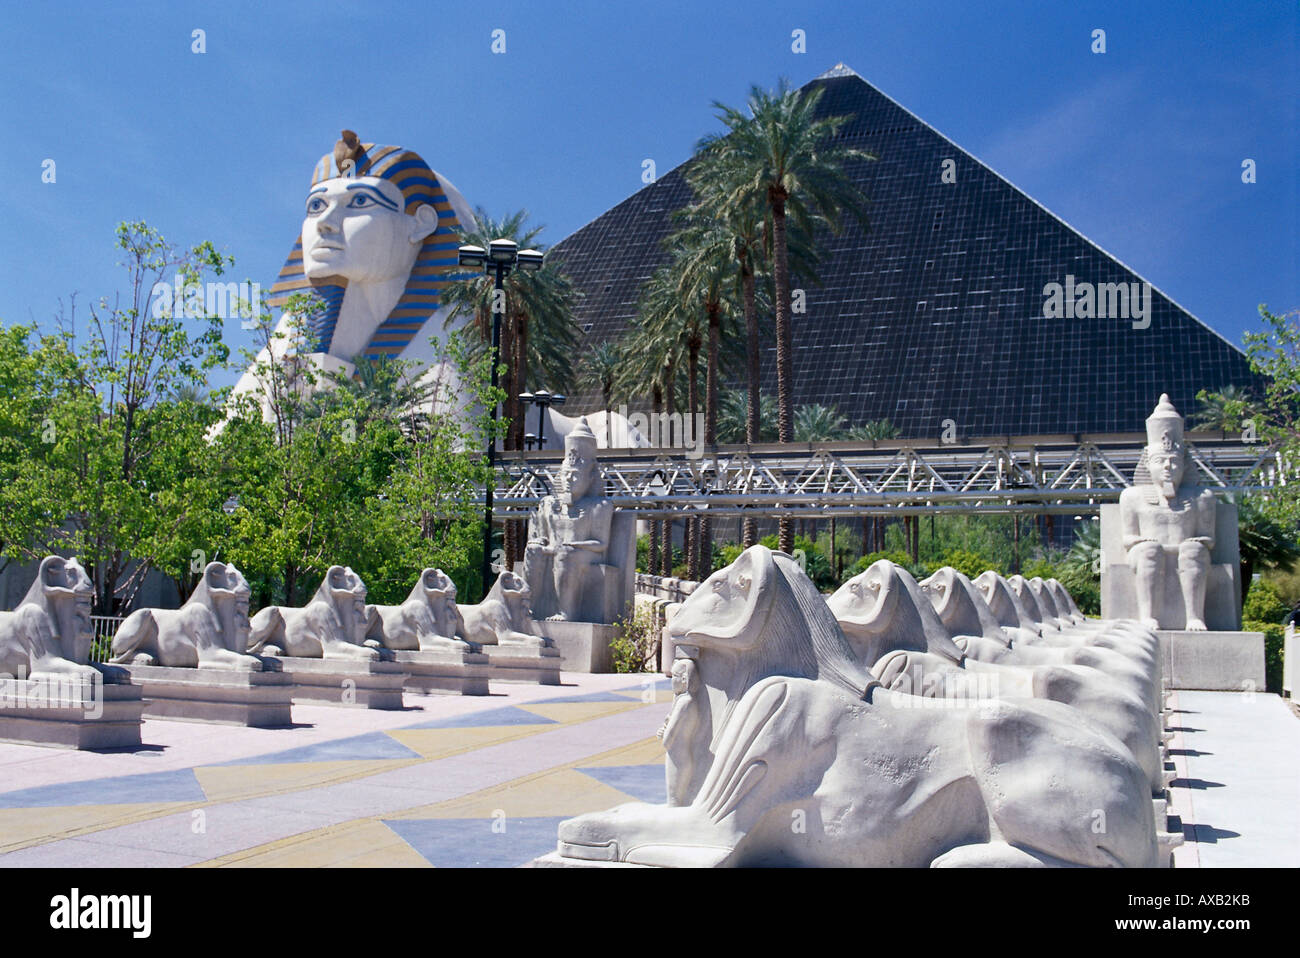 Luxor Las Vegas – The Egyptian Themed Resort – Road to Something New